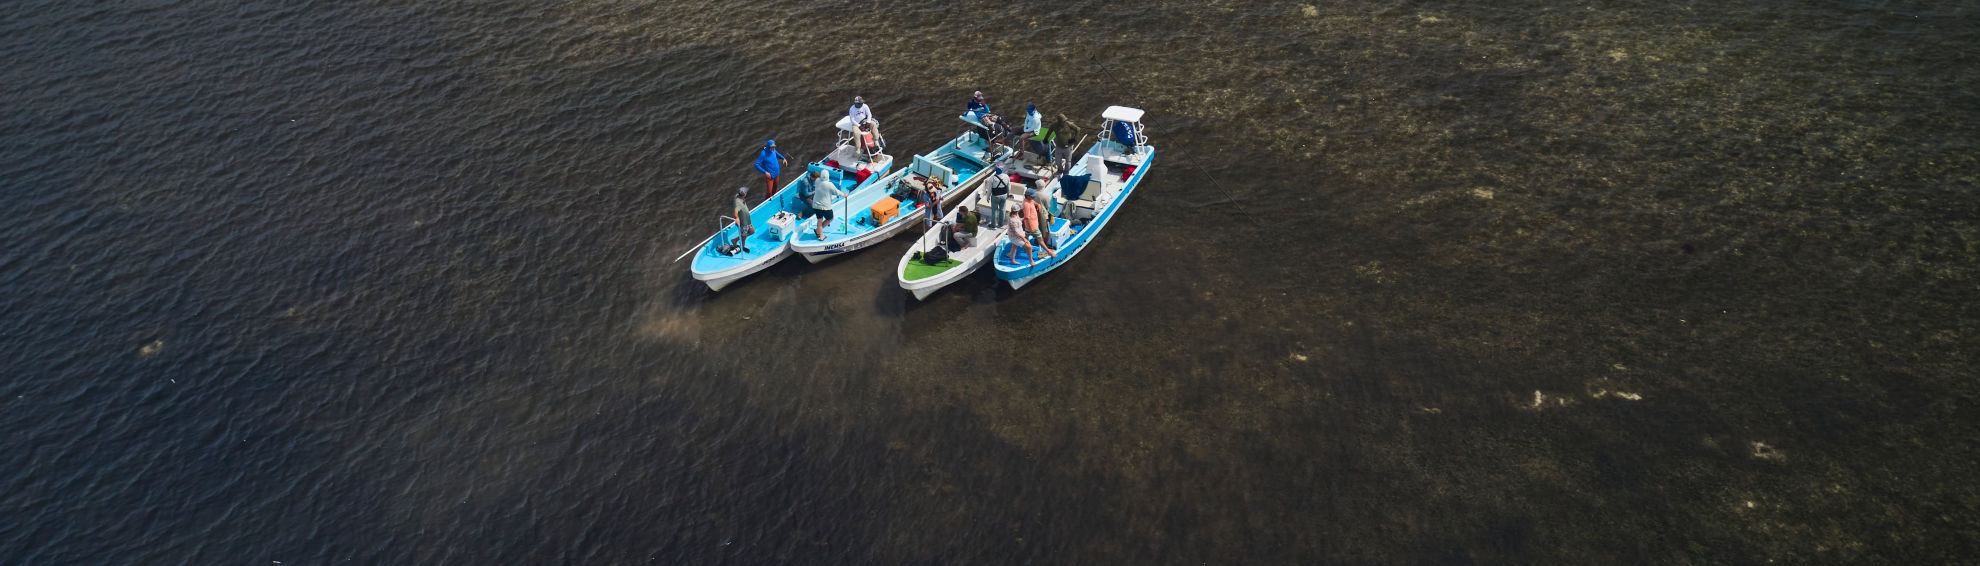 A drone view of 4 boats gathered together in the ocean